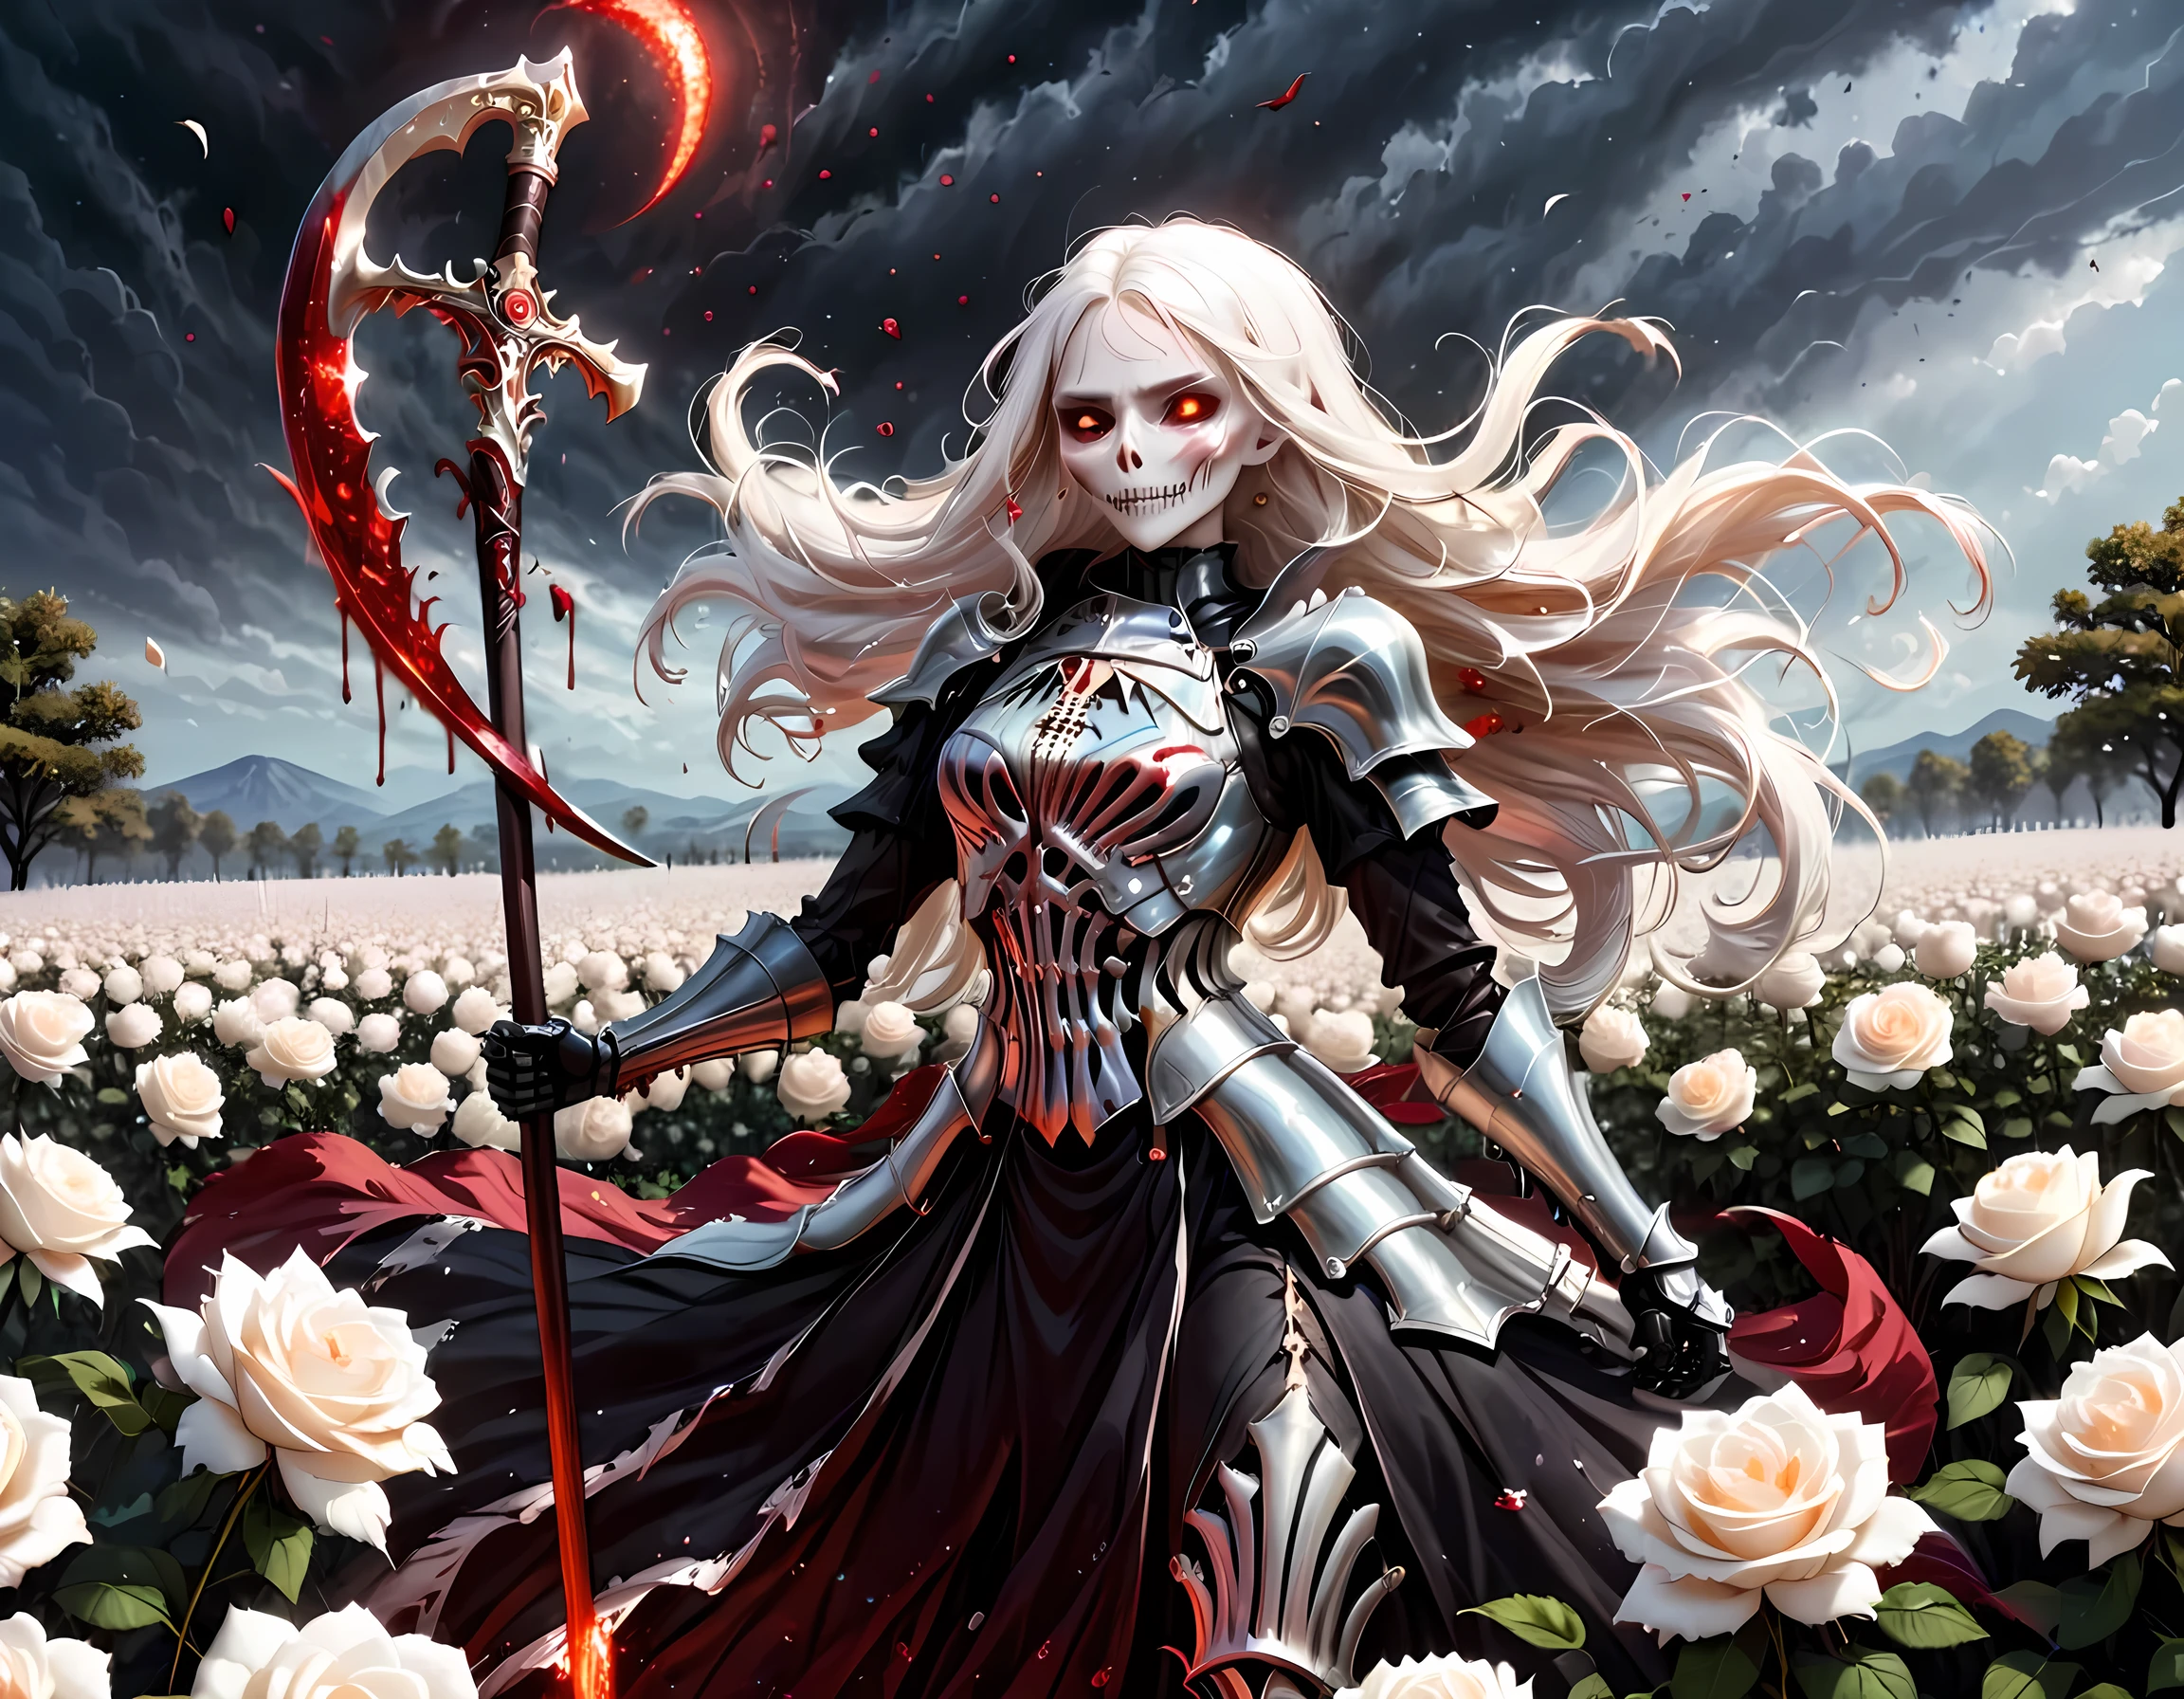 dark fantasy art, a female skeletal grim reaper in a field of white roses, the reaper has (skeletal head: 1.3) , long (white: 1.2) hair , red glowing eyes, she wears black robes, and black armor dress, ArmoredDress, flowing robes, she holds a scythe, in her arms, the scythe is dripping blood, a field of white roses background (best details, Masterpiece, best quality: 1.4), dynamic range, ultra wide shot, photorealism, depth of field, hyper realistic, RagingNebula